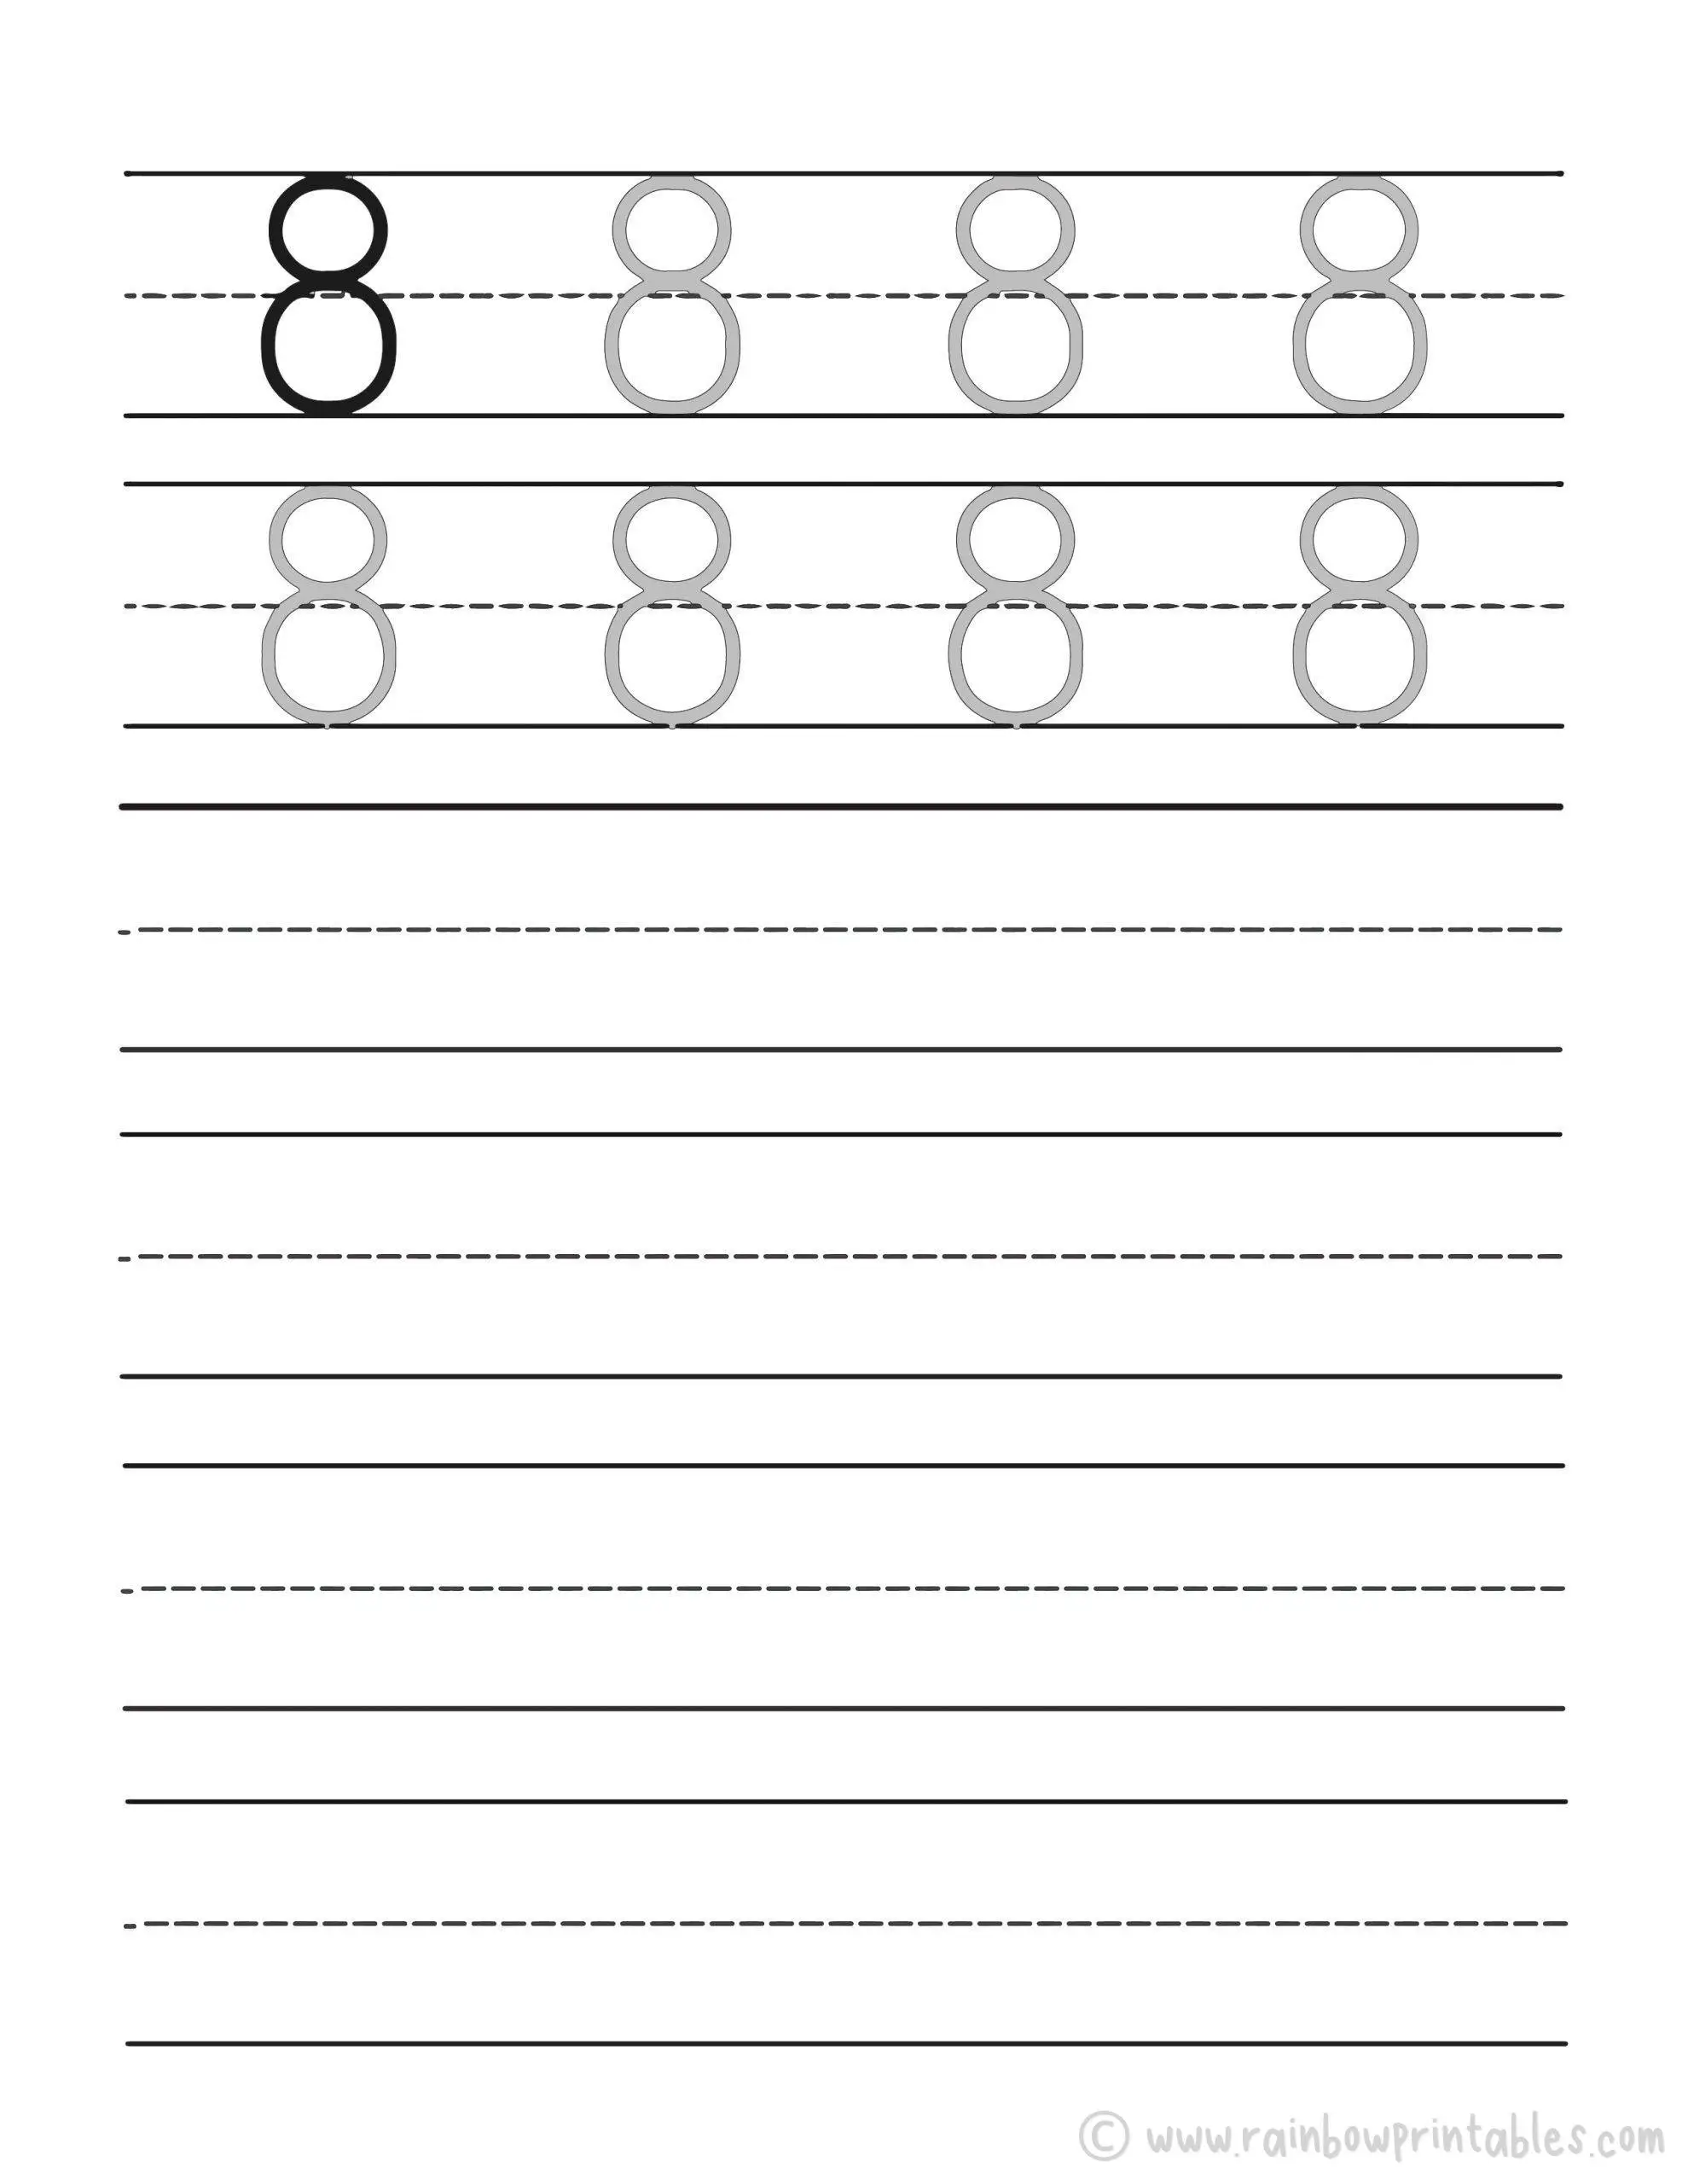 Trace Numbers Worksheet-EIGHT-8